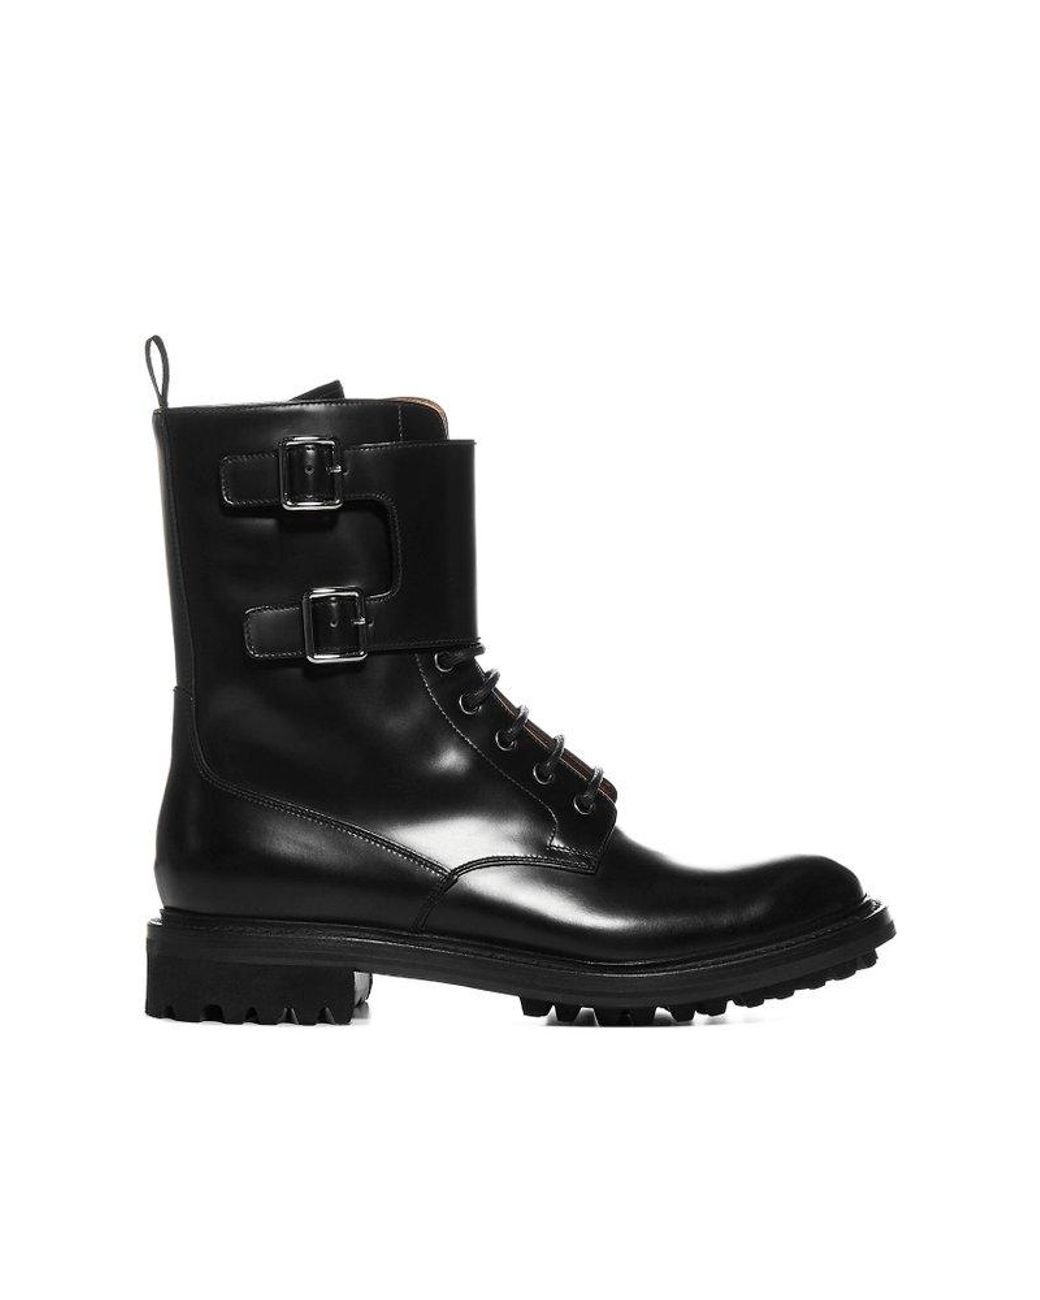 Church's Leather Carly Round Toe Combat Boots in Black | Lyst